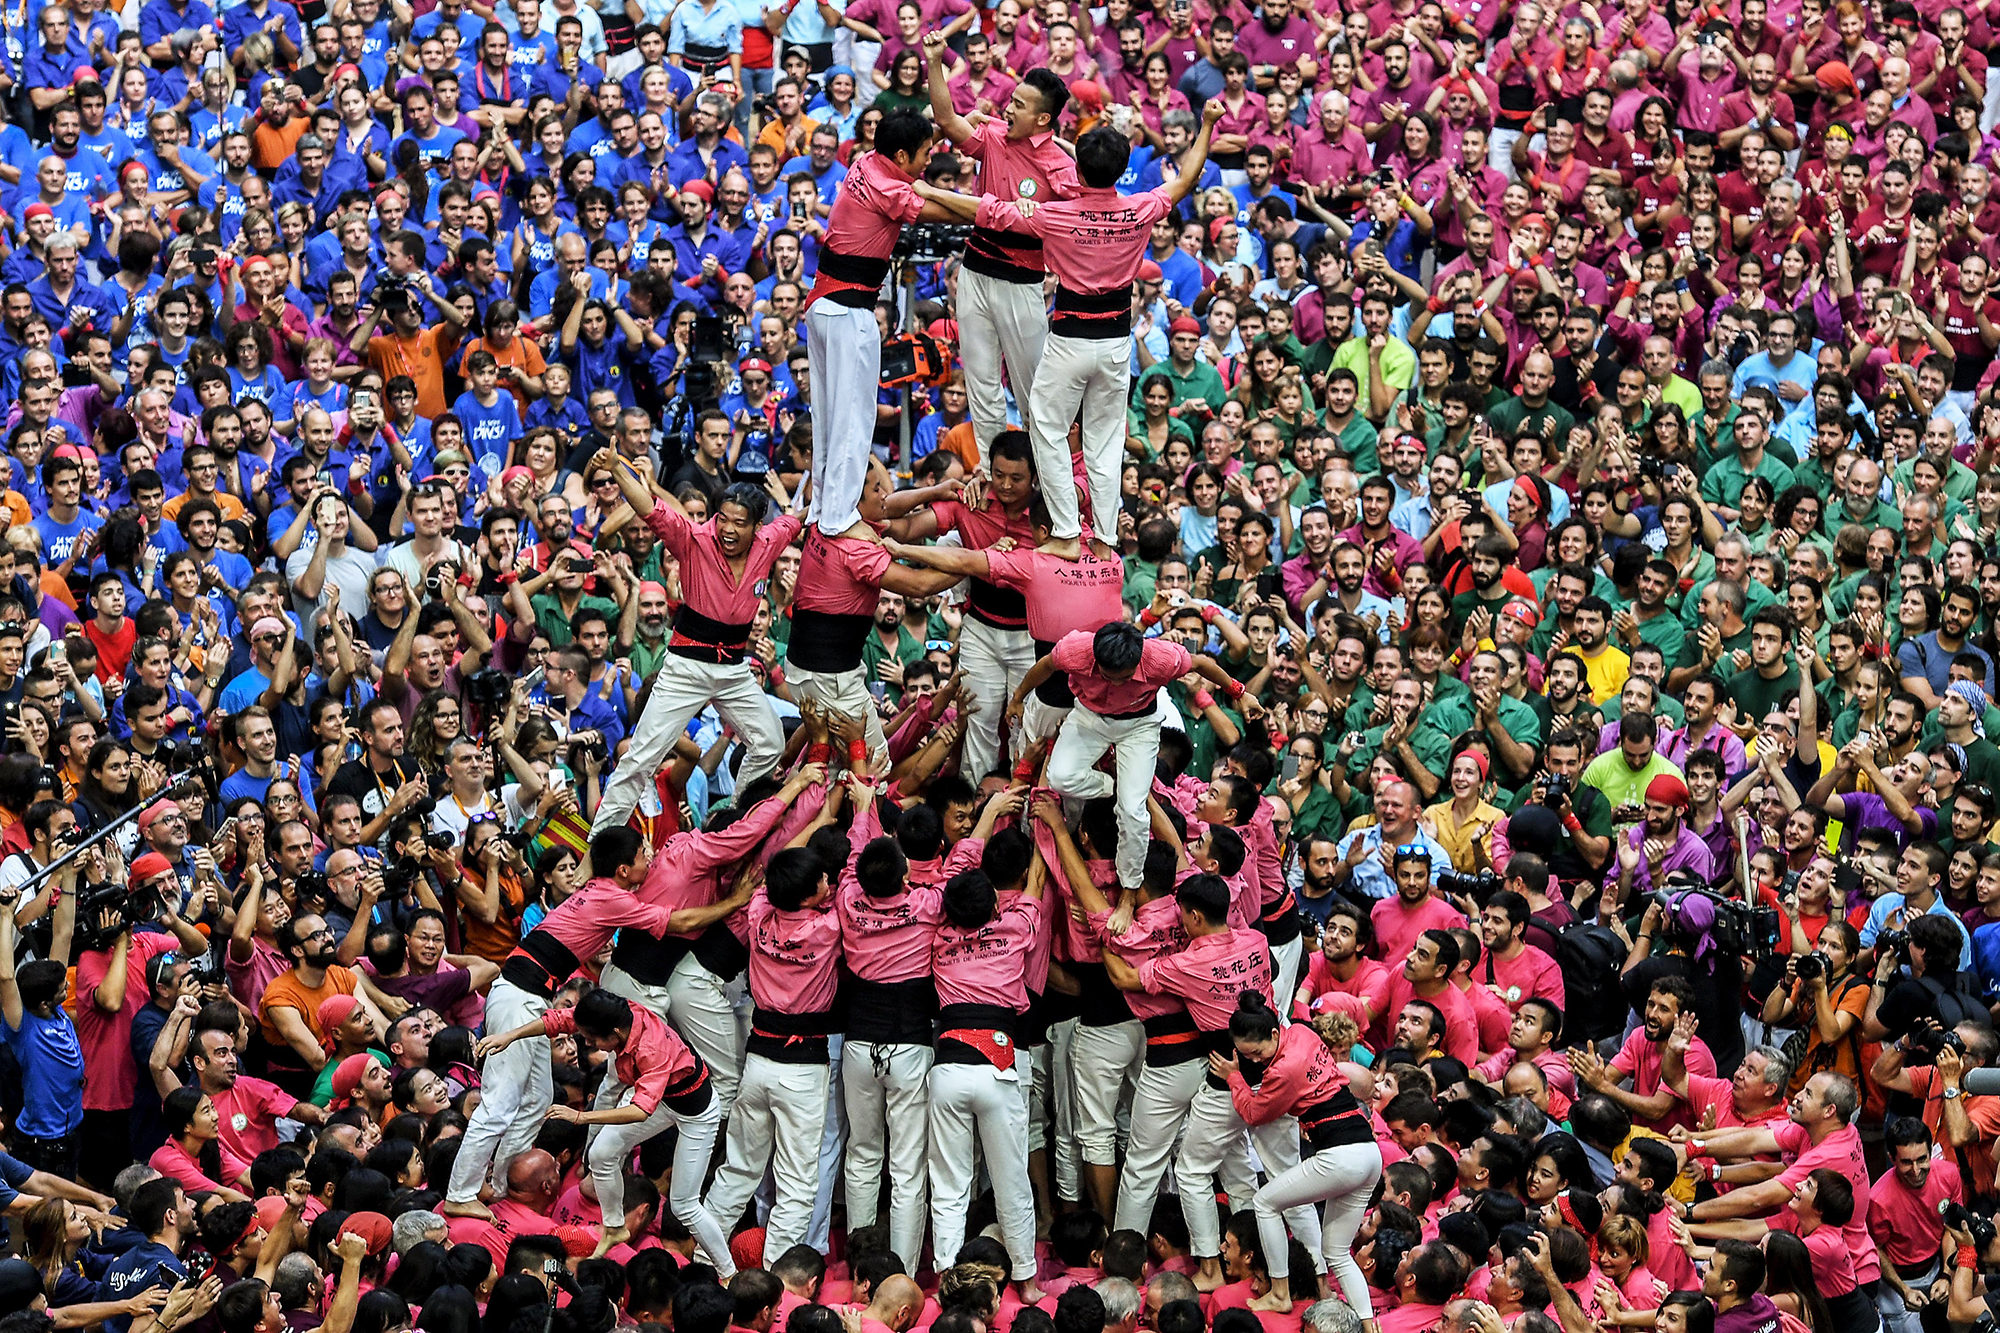 Members of the colla 'Xiquets de Hanghzou' celebrate after building a human tower in Tarragona, Spain, on Oct. 1, 2016.